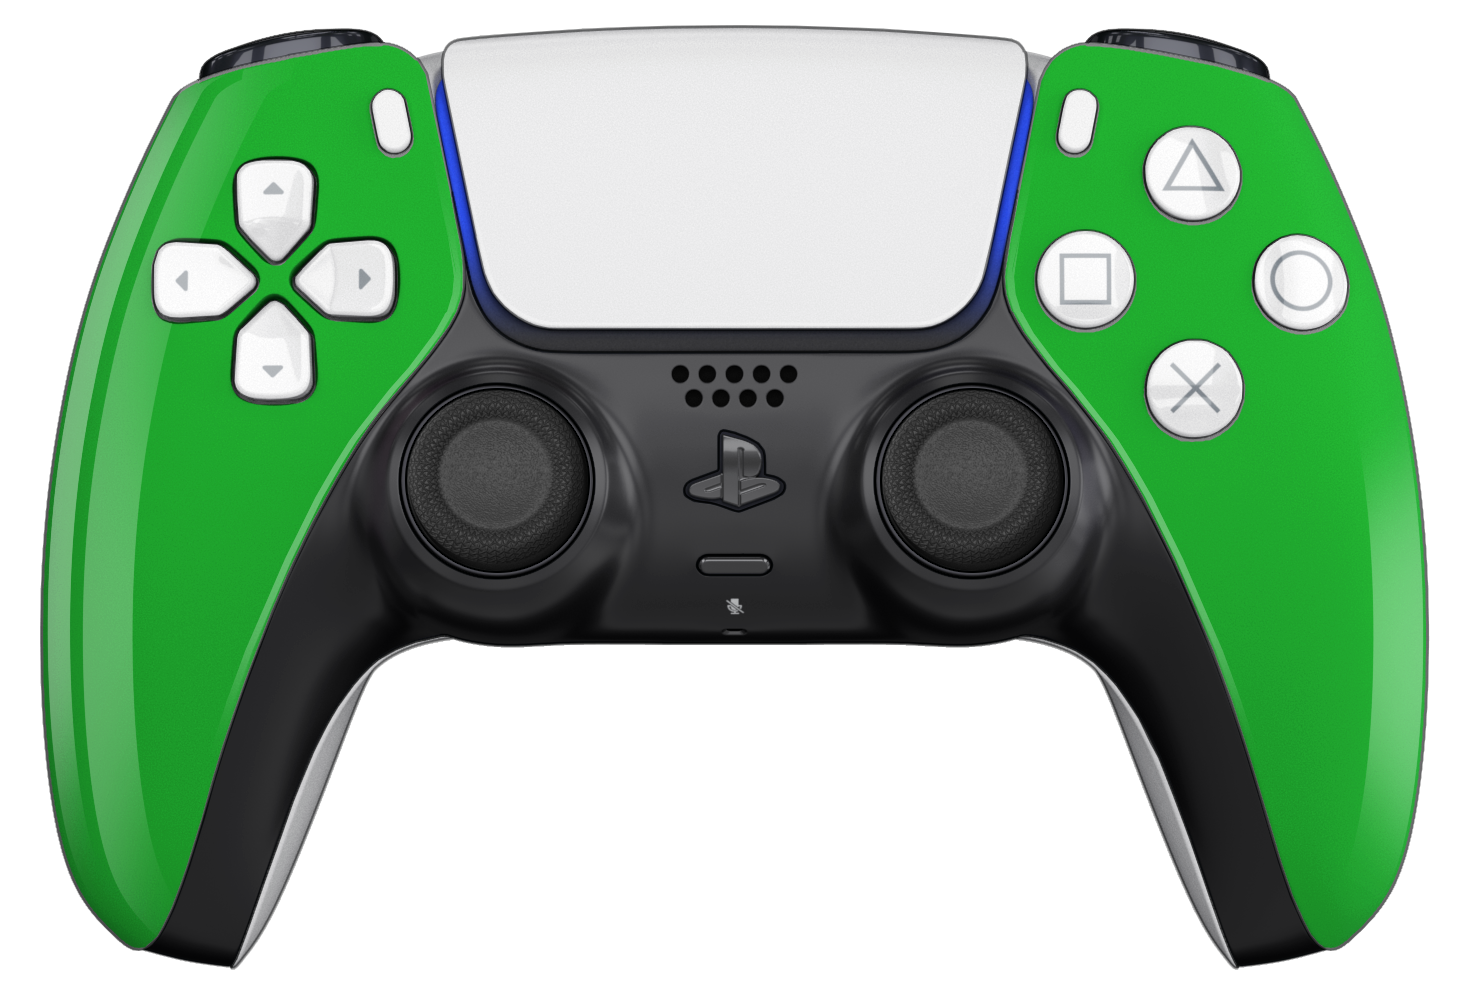 https://thecontrollerpeople.com/wp-content/uploads/2022/08/polished-green-ps5-controller.png